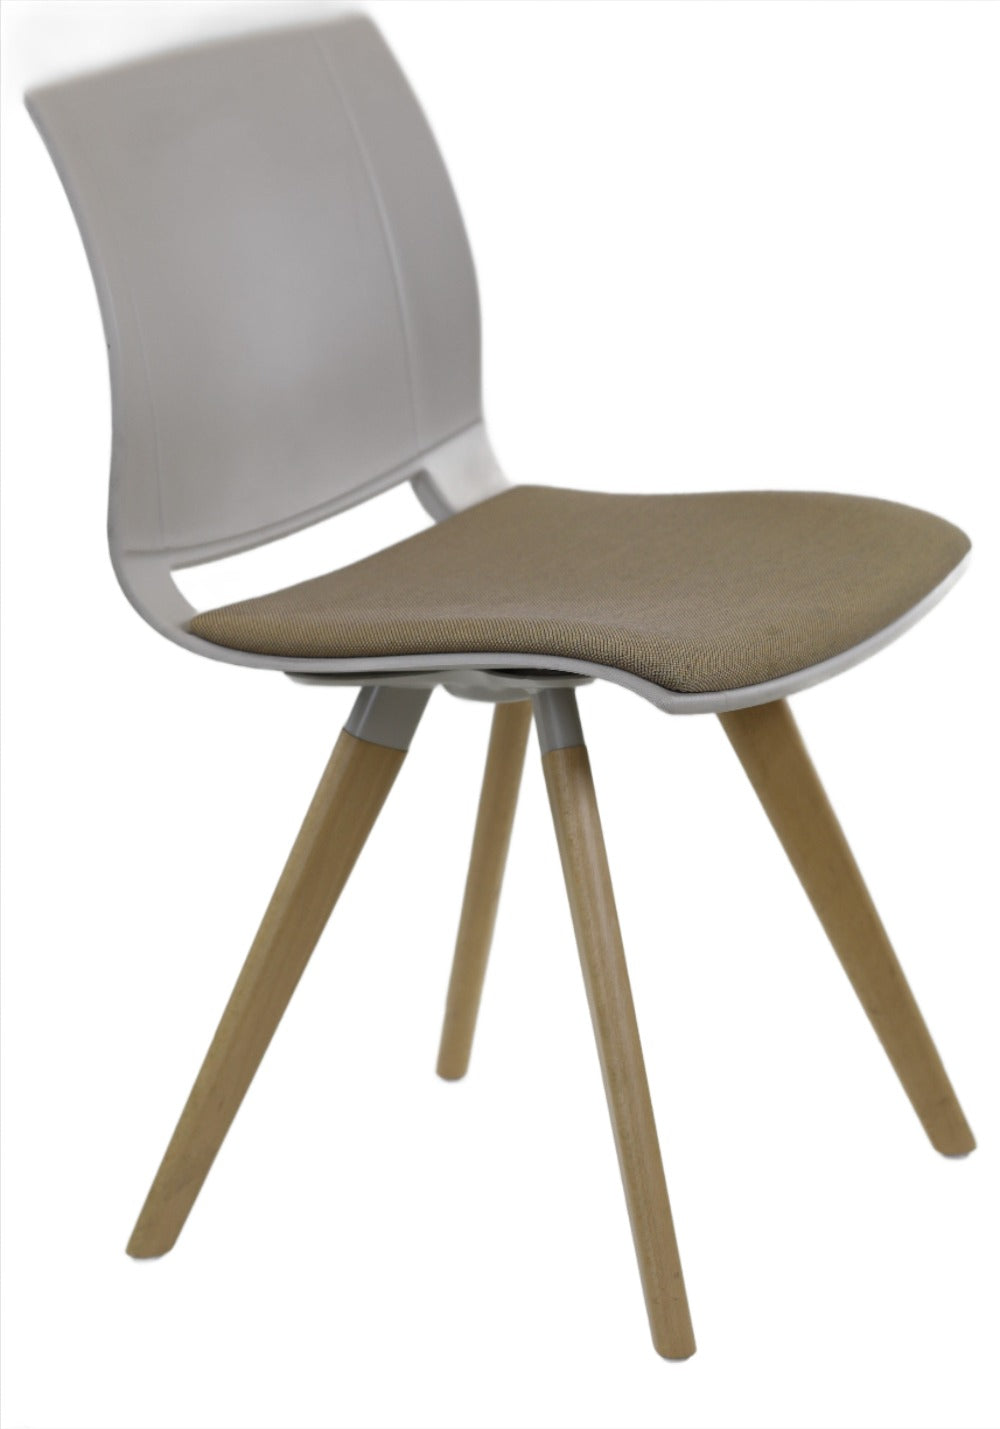 Kusch & Co: 20821 Visitor Chair - Refurbished